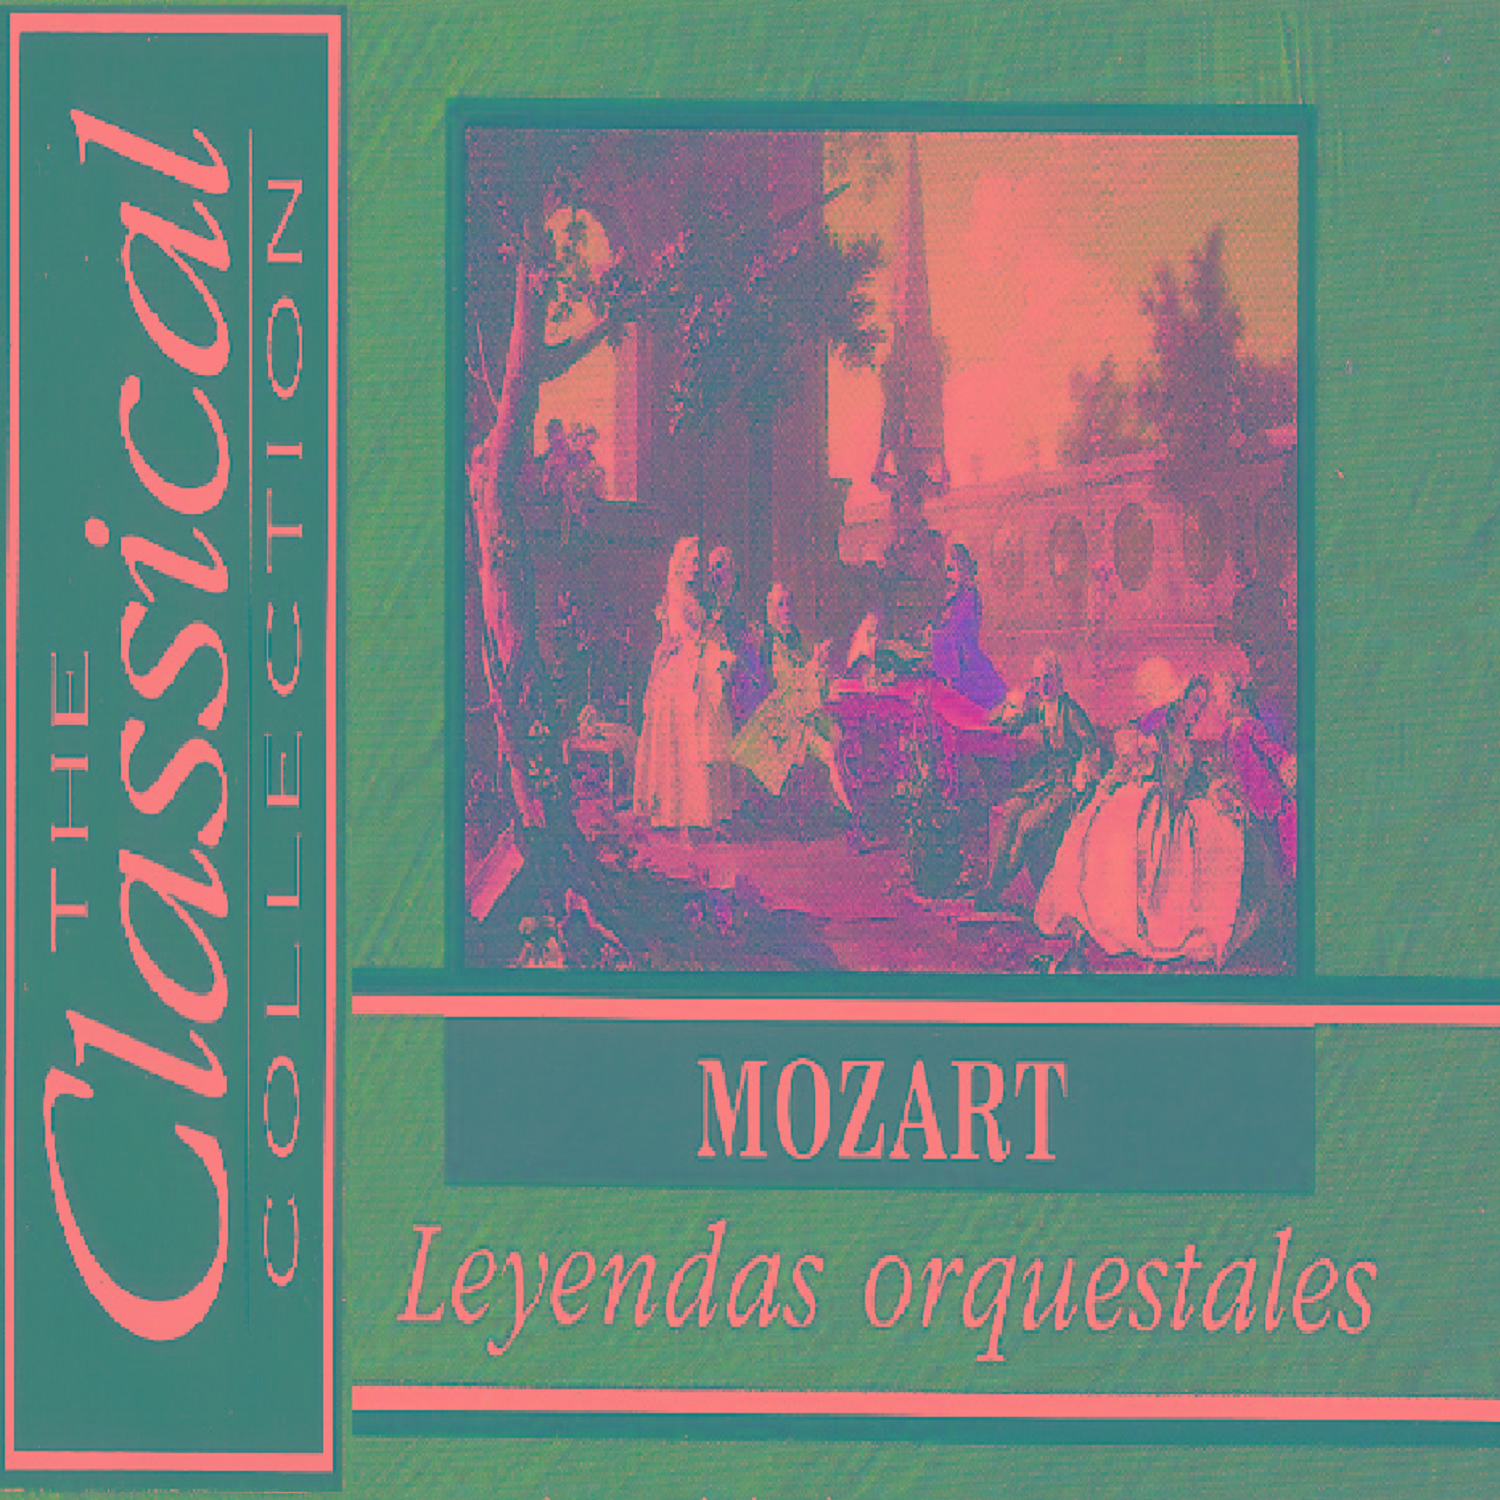 The Classical Collection - Mozart - Leyendas orquestrales